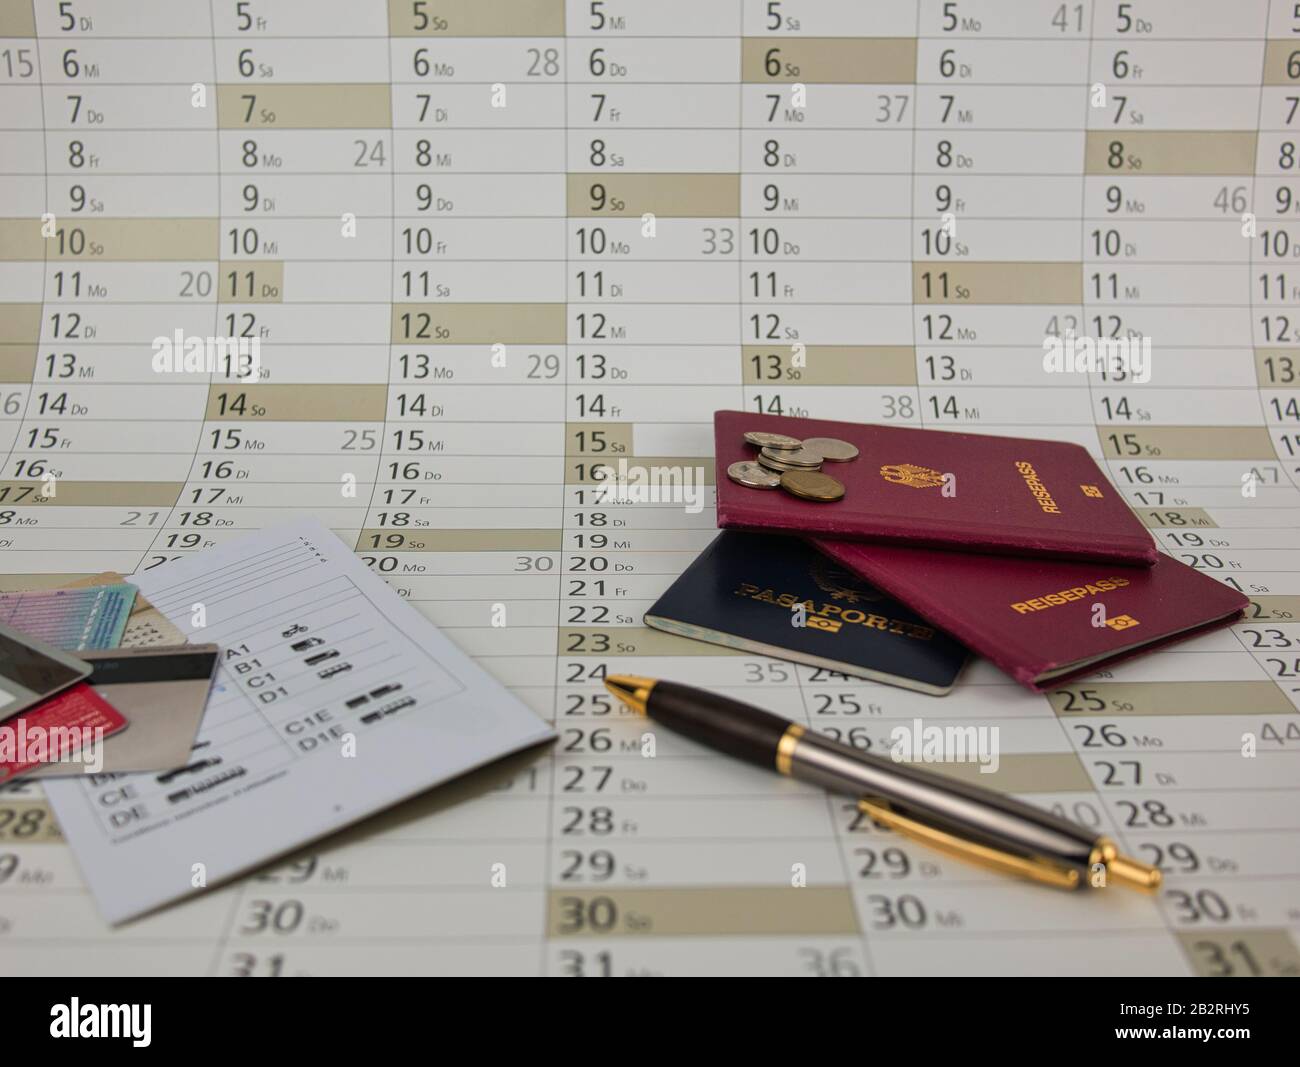 A calendar to plan with ballpoint pen Coins and passports Stock Photo